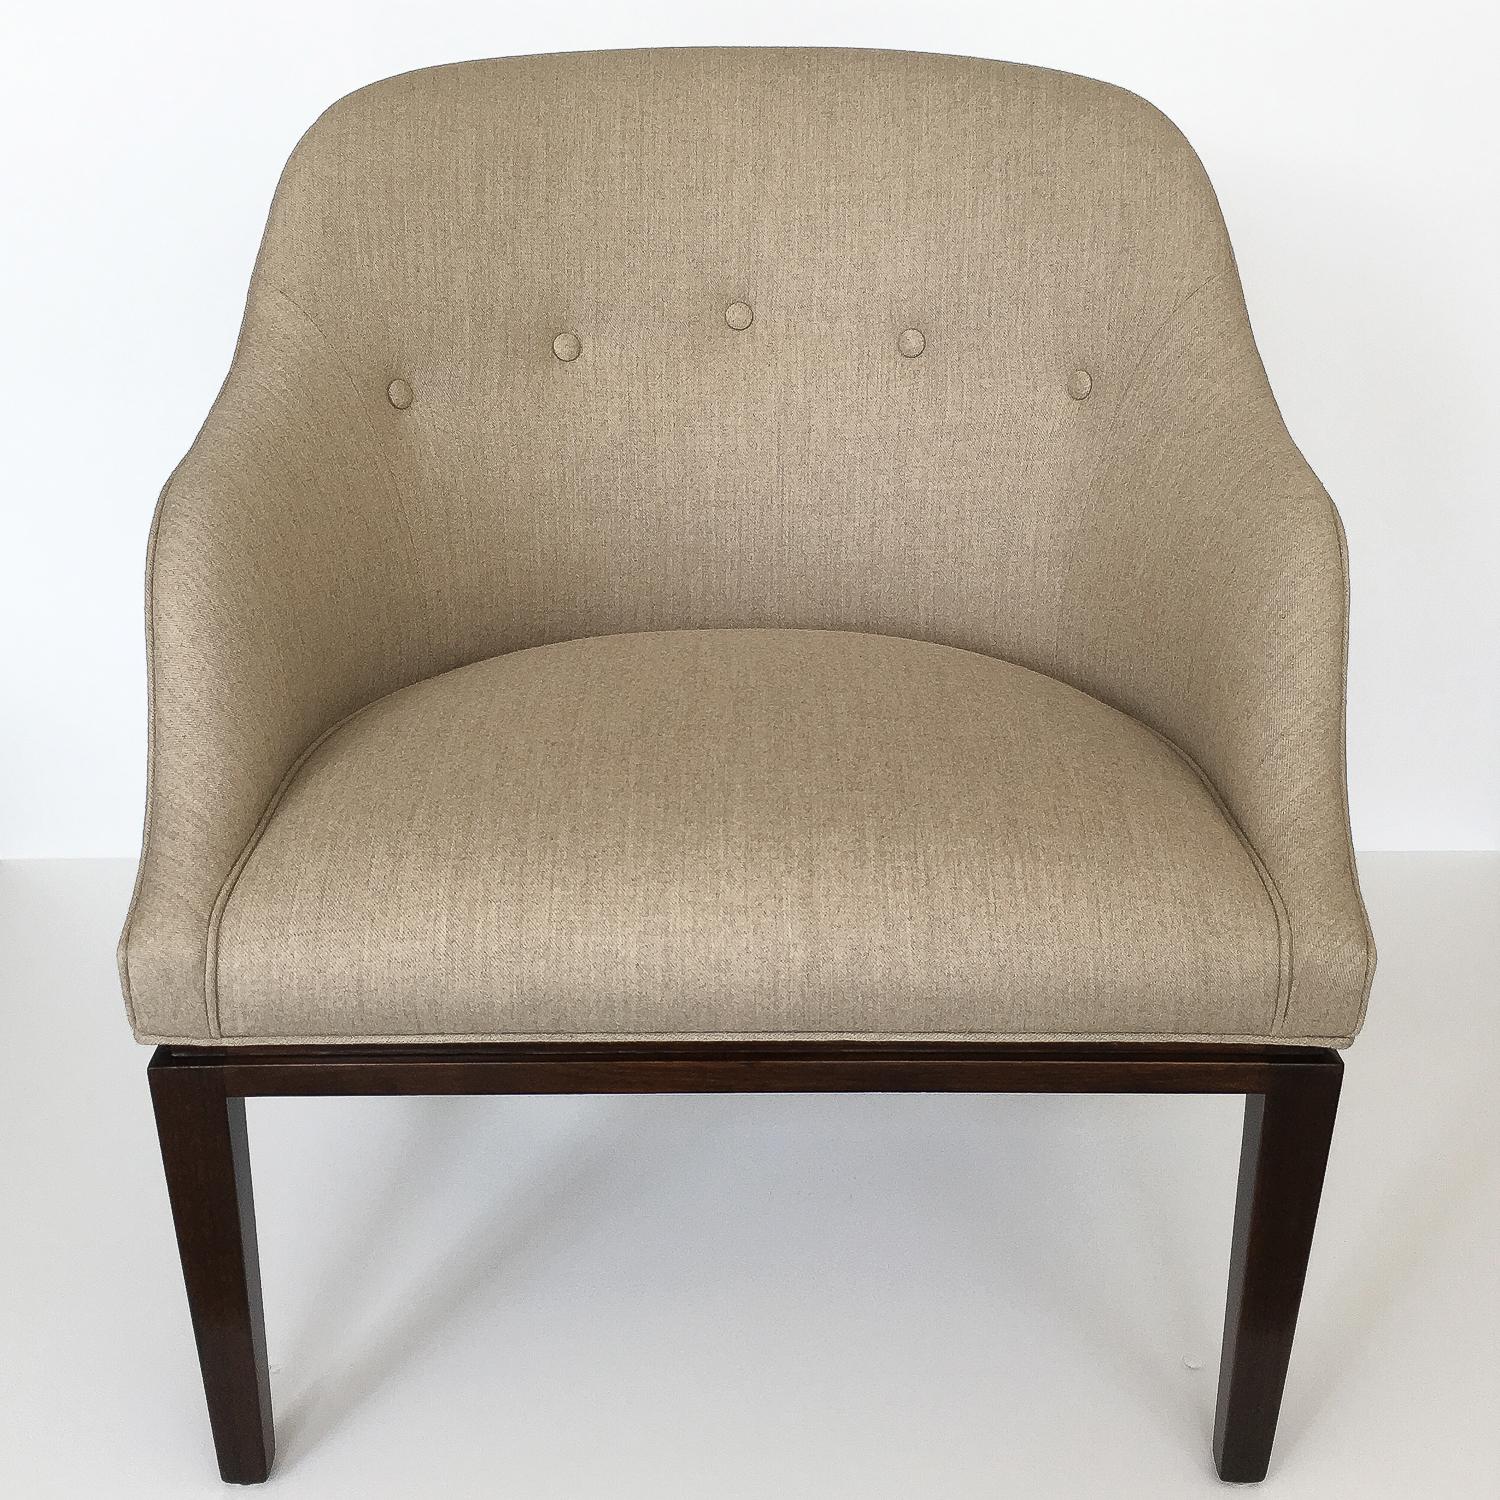 Sophisticated and tailored lounge chair by Edward Wormley for Dunbar, circa 1950s. Dark mahogany base with inset reveal just below the upholstery line. Curved back with splayed angled legs. Newly upholstered in a heathered natural oatmeal colored